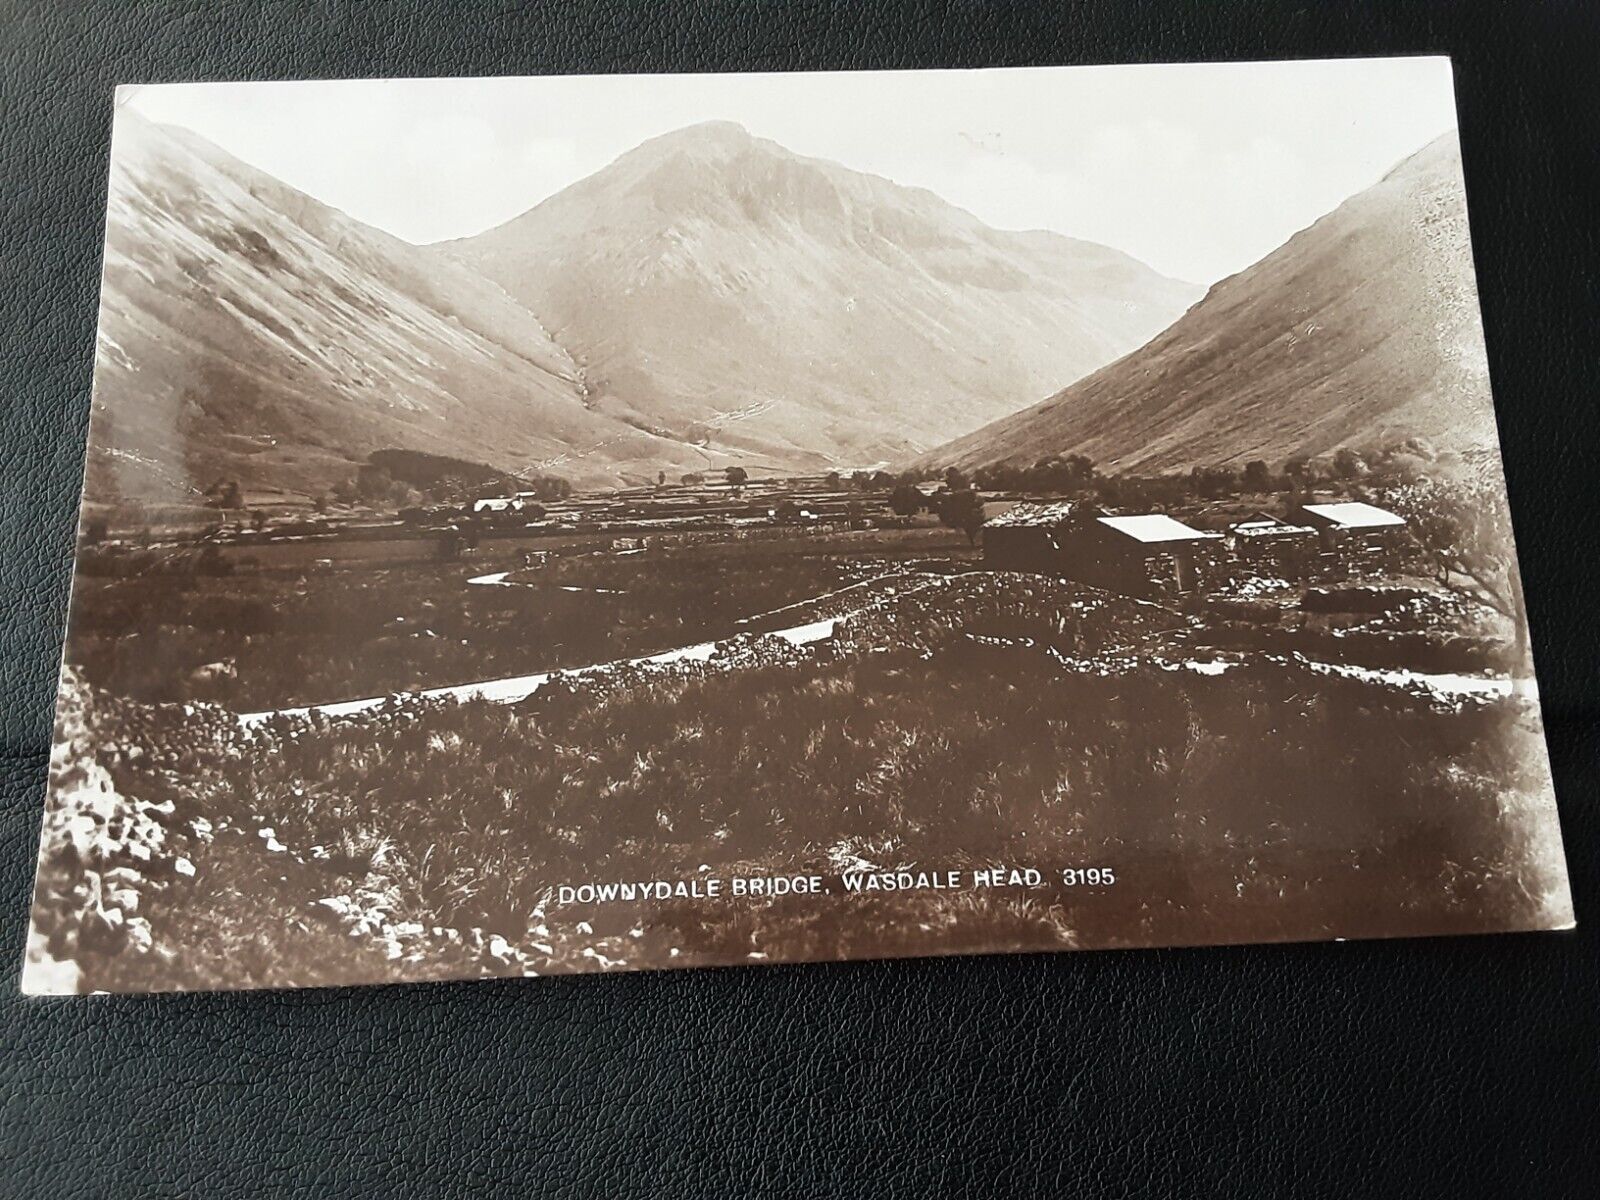 House Clearance - Old A Jackson of Gosforth service of Downydale Bridge Wasdale Head Cumbria 1932